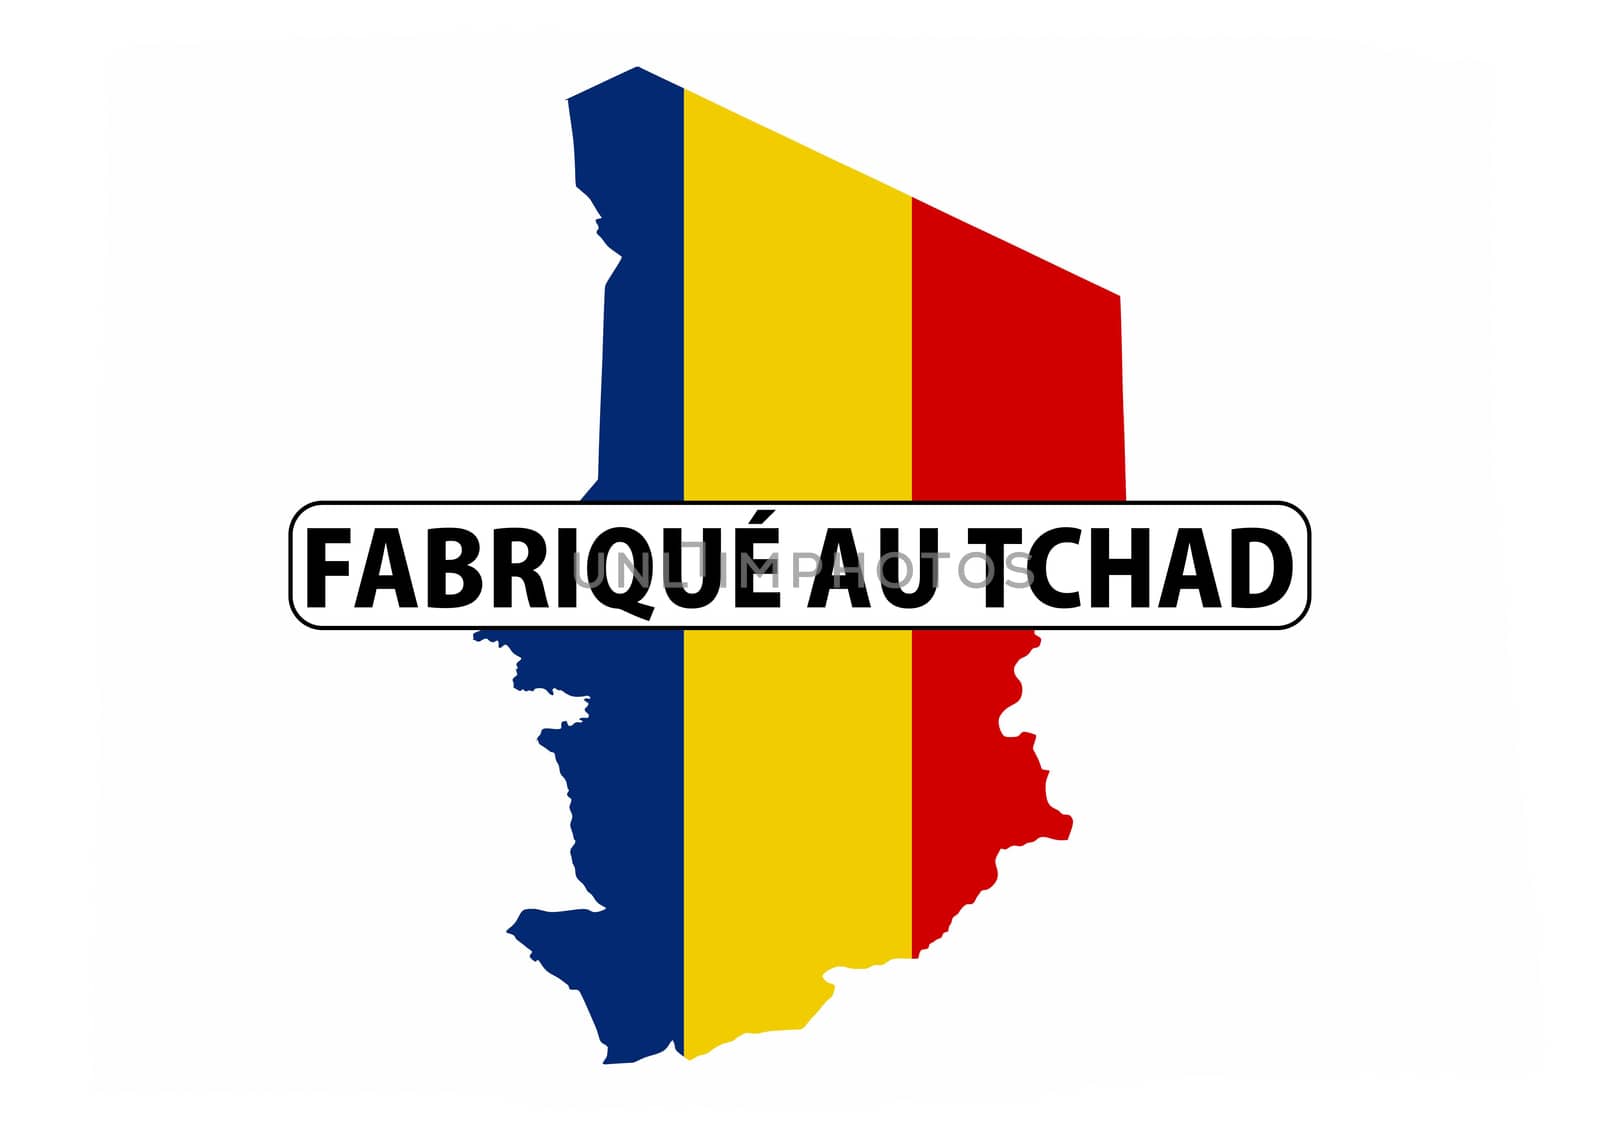 made in chad by tony4urban